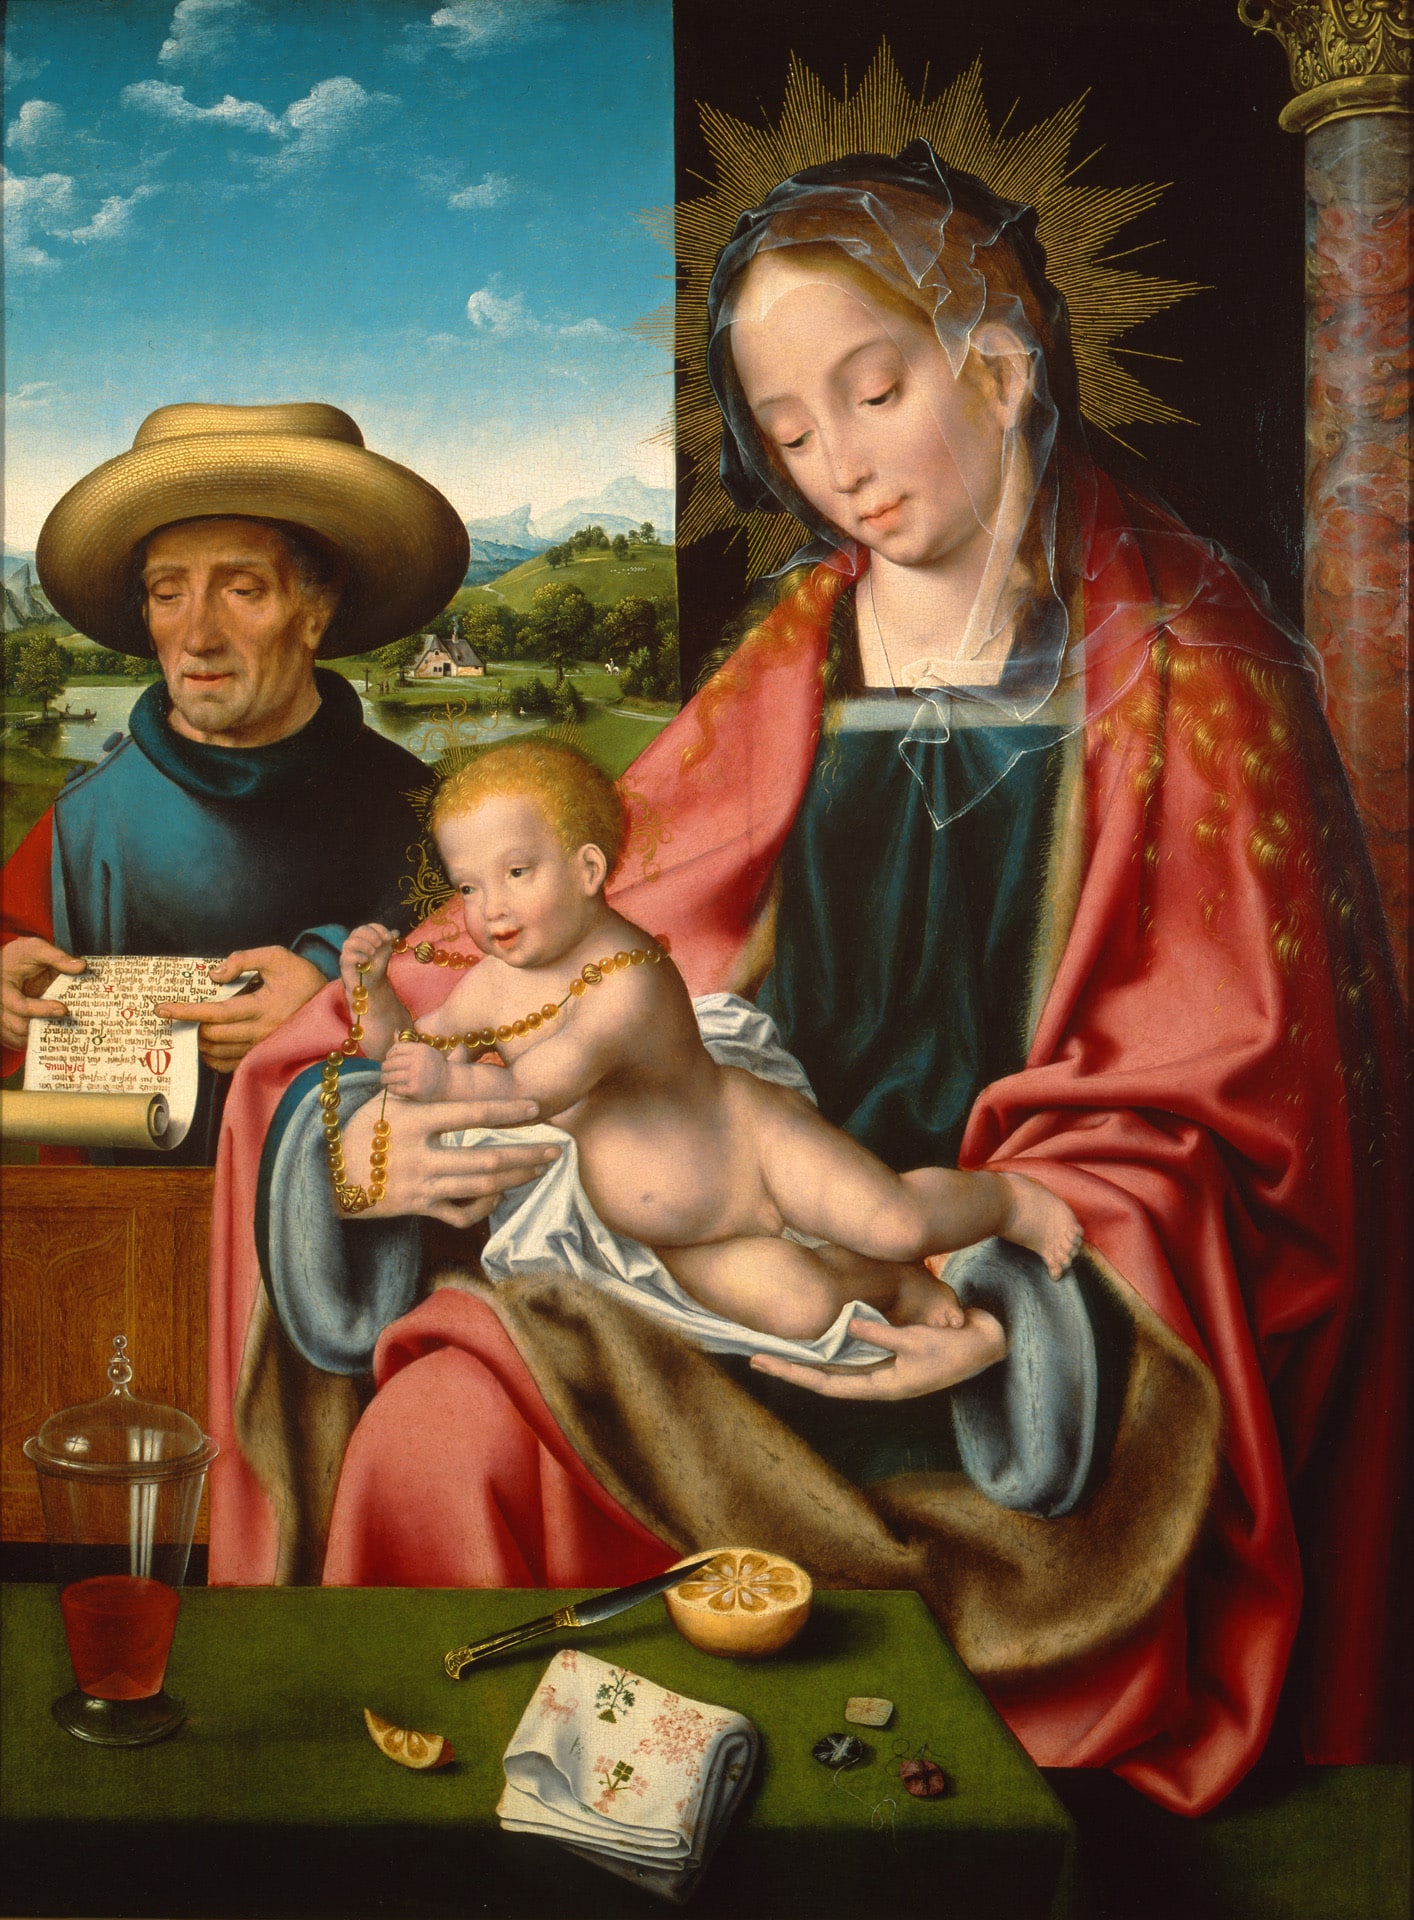 a painting of the virgin mary in red and blue robes holding baby Jesus with a man and landscape in the background